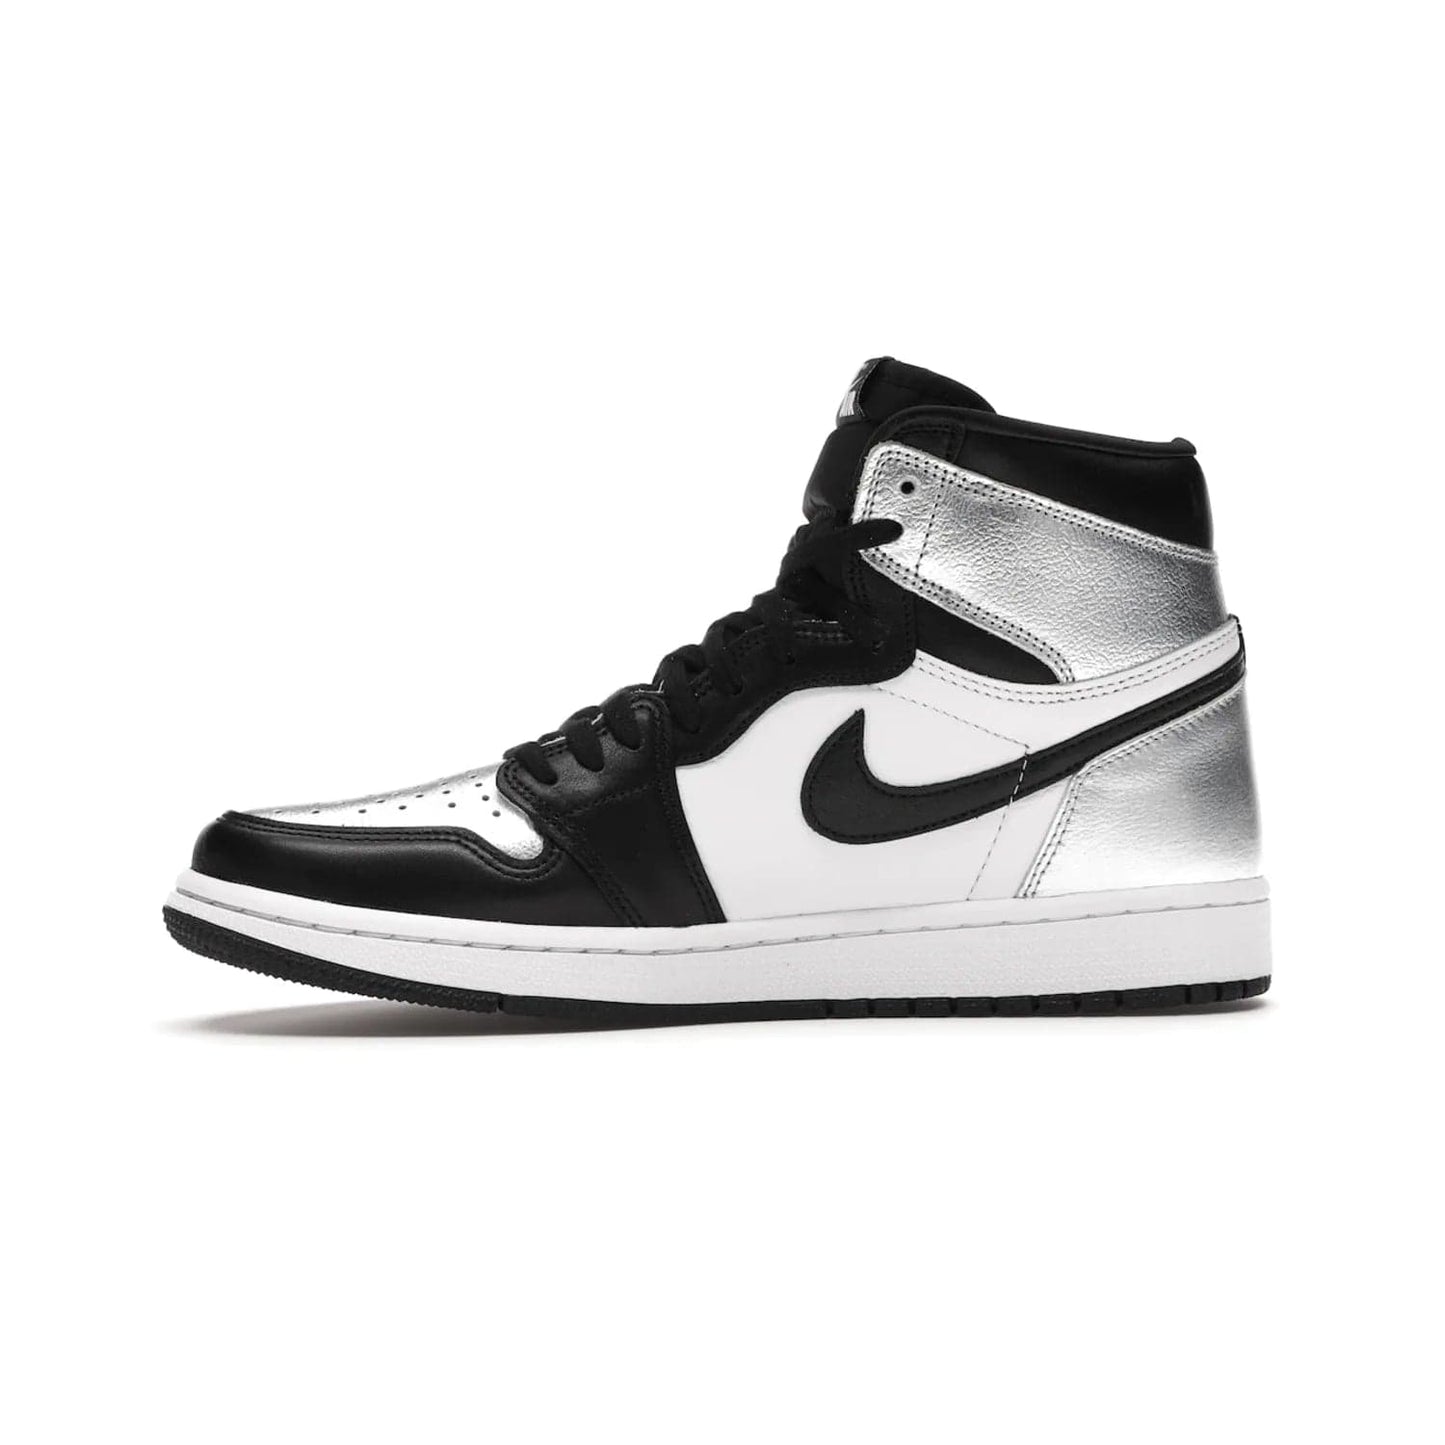 Jordan 1 Retro High Silver Toe (Women's) - Image 18 - Only at www.BallersClubKickz.com - Introducing the Jordan 1 Retro High Silver Toe (Women's): an updated spin on the iconic 'Black Toe' theme. Featuring white & black leather and silver patent leather construction. Nike Air branding, Air Jordan Wings logo, and white/black sole finish give a classic look. The perfect addition to an on-trend streetwear look. Available in classic black & white, this Jordan 1 is an instant classic. Released in February 20